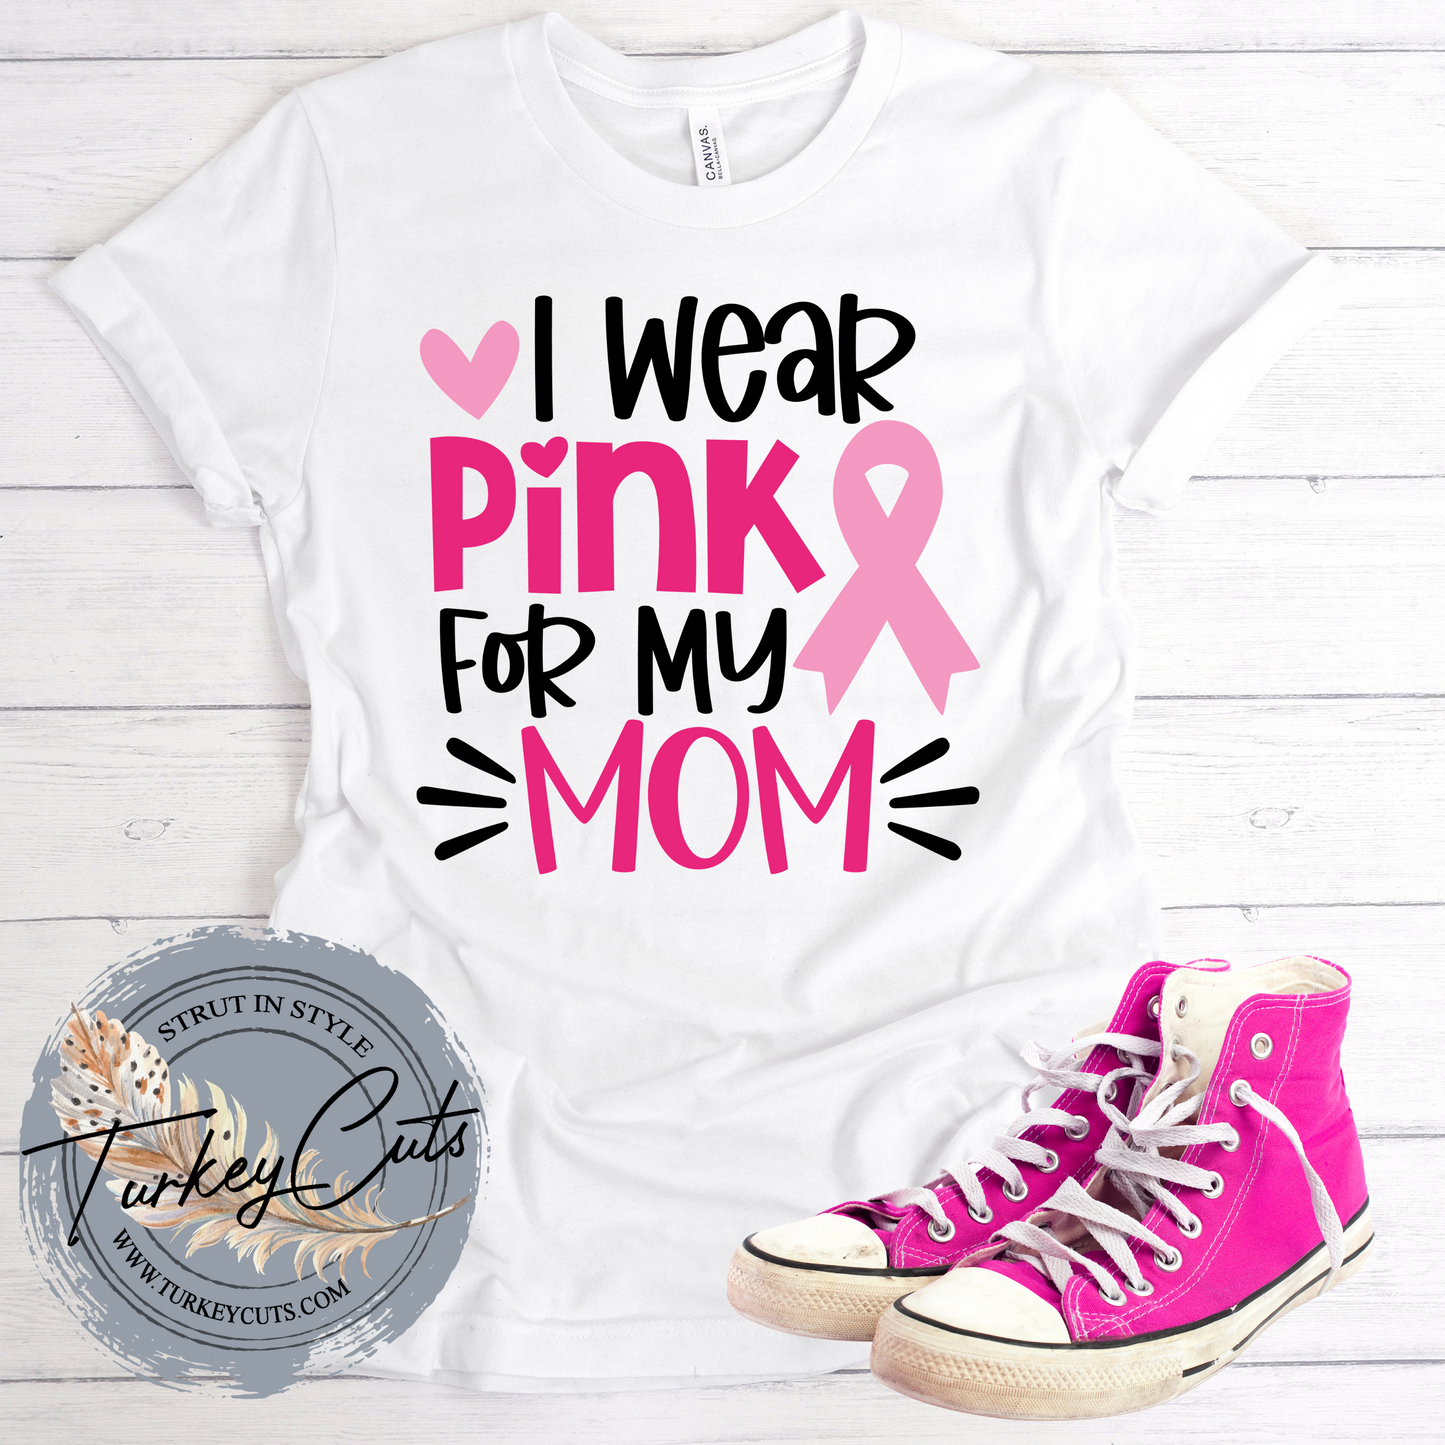 I Wear Pink For My Mom (can be customized to ANY name)